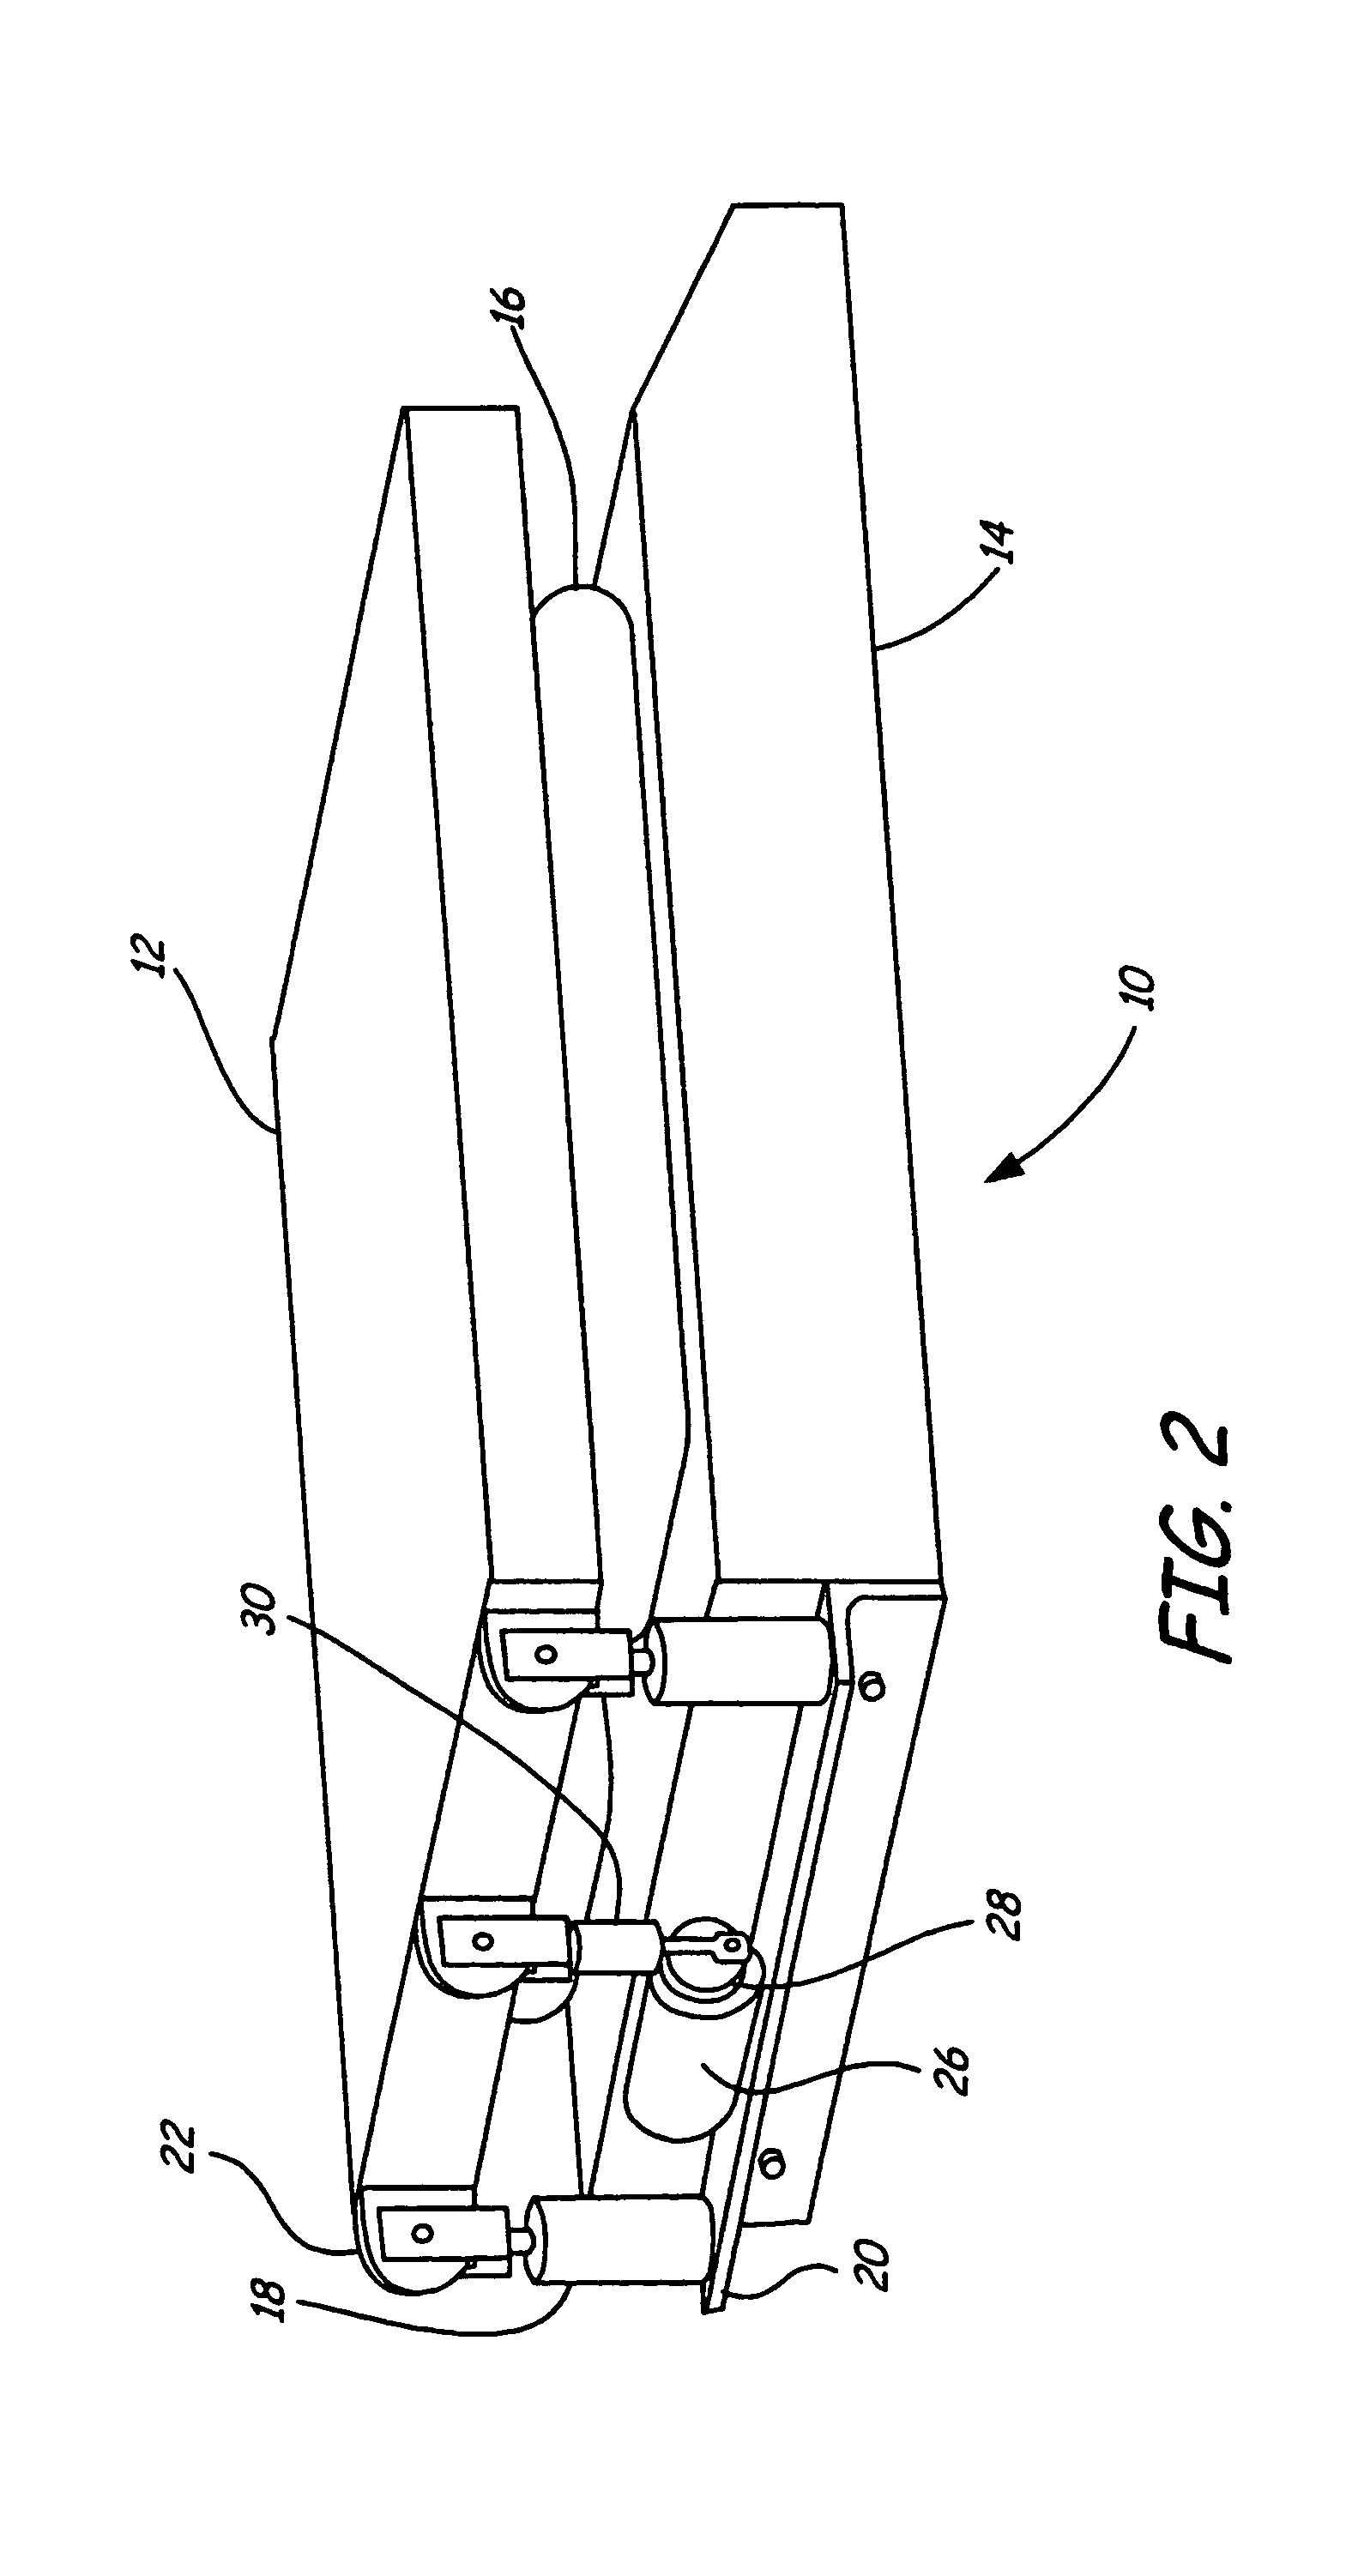 Apparatus for thawing frozen biological fluids utilizing heating plates and oscillatory motion to enhance heat transfer by mixing